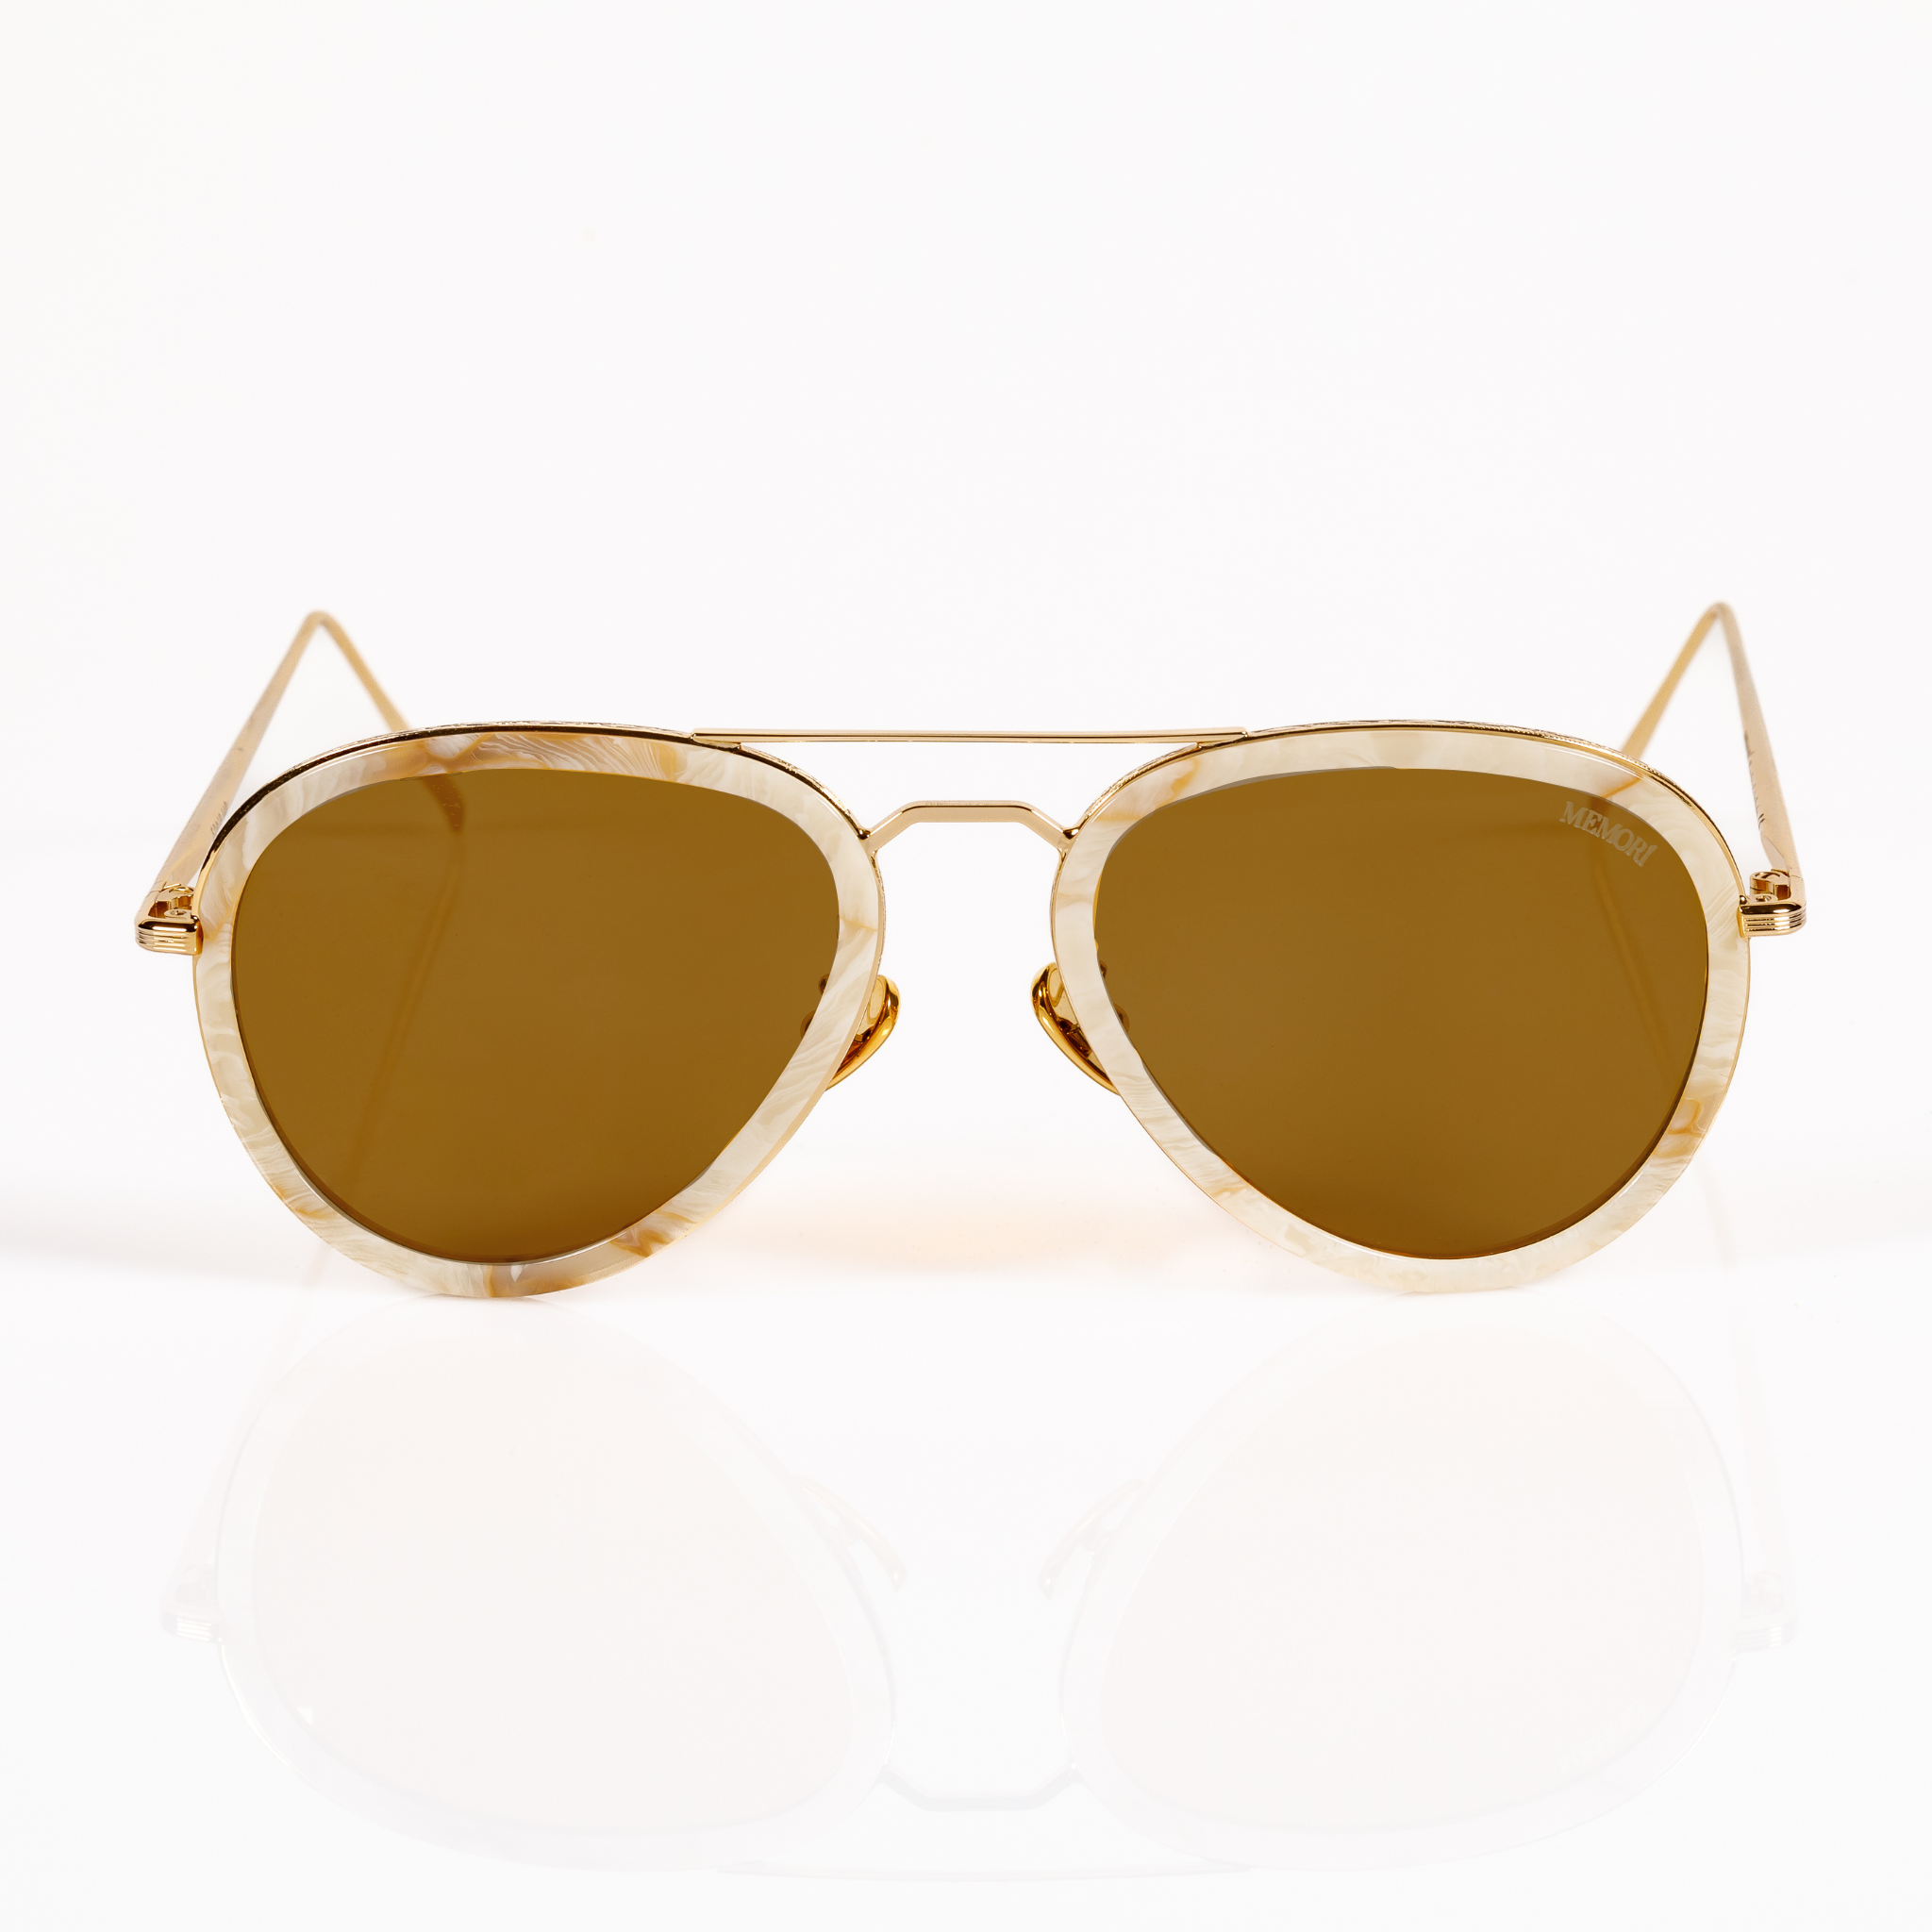 Aviator sunglasses for small faces gold  frame brown lens front view that shows white multidimensional artisanal acetate sheaths around lenses